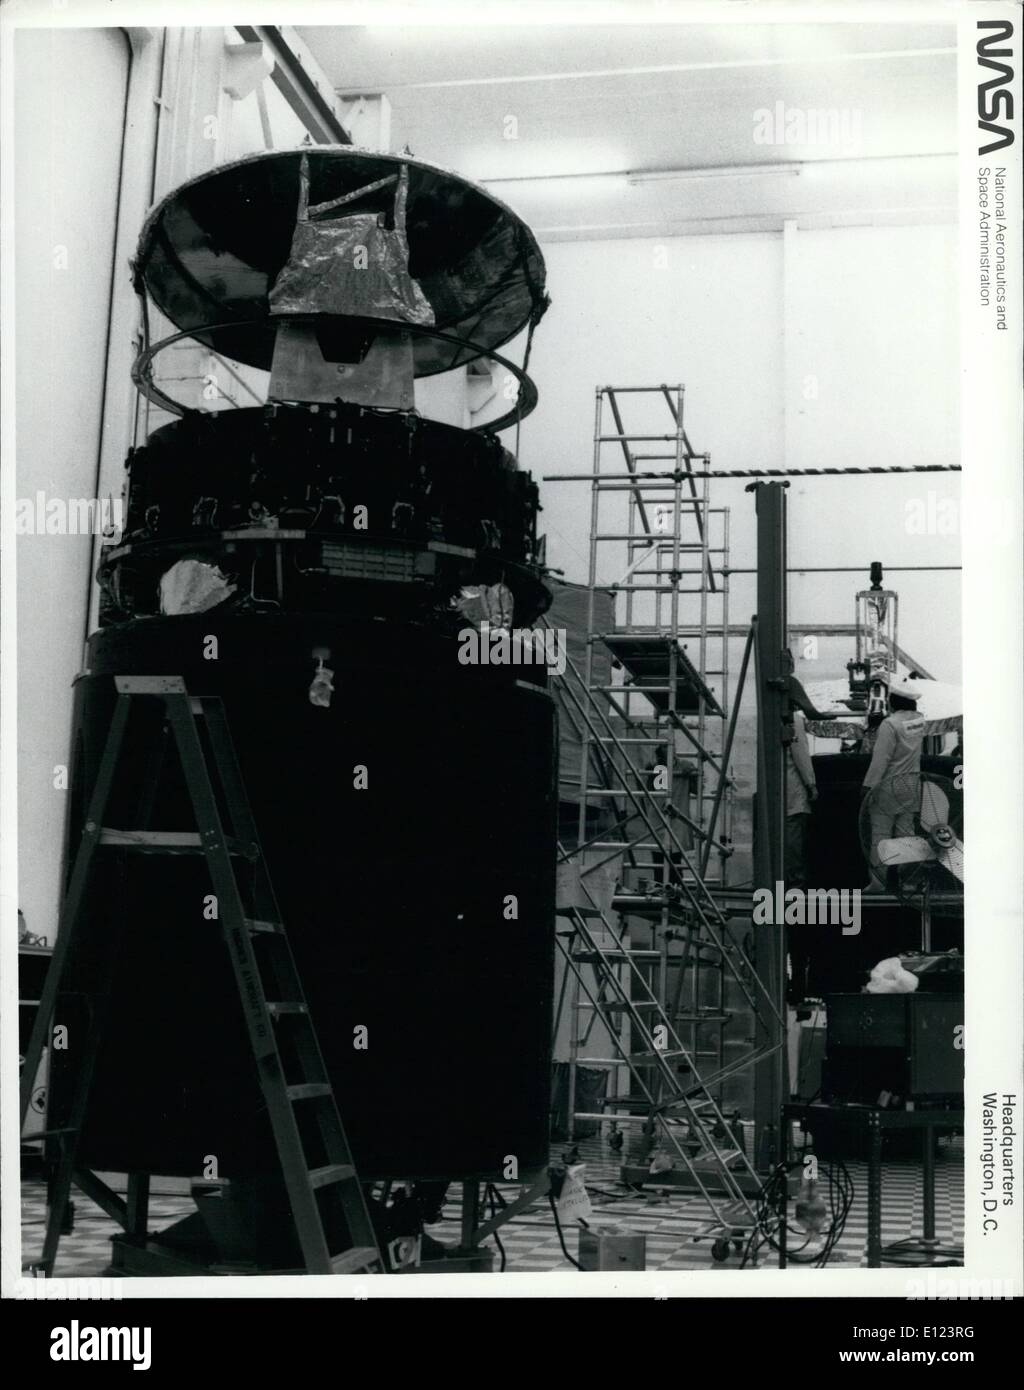 Jun. 06, 1984 - Kennedy Space Center, Fla: Two of the commercial satellites that will be haulked into orbit on Shuttle Flight 412-F are shown being proceeded in Hangar AM at Cape Canaveral Air Force Station.To t right is the Telstar 3 spacecraft, the second of three advances satellites owned by AT &T and used to valey a variety of voice, date, audio and video signals over its 24 transponders. In the foreground us SBS 4, a demotic Communications satellite for Satellite Business Systems, which will lease five of its 10 transponders to Satellite Television Corp Stock Photo